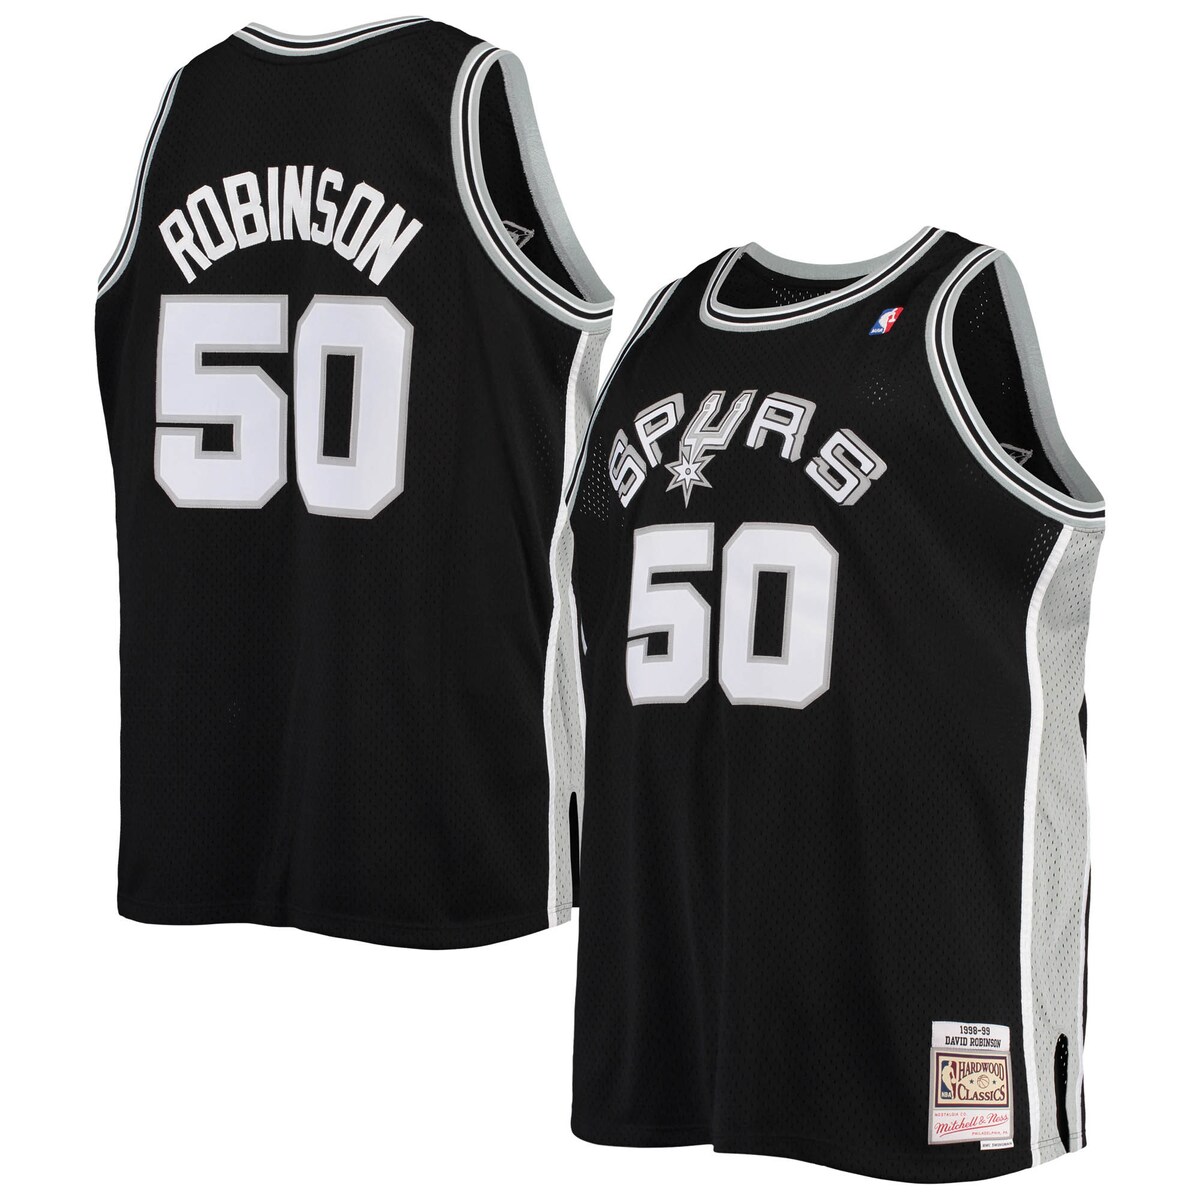 Your San Antonio Spurs fandom stretches back for years, and you love to celebrate it at every opportunity. Before the next game tips off, pay homage to your team's storied past while also recognizing one of its all-time brightest stars with this David Robinson Hardwood Classics Swingman jersey from Mitchell & Ness! Its throwback-inspired design and player-specific graphics are sure to remind fellow fans of all their favorite San Antonio Spurs wins, both past and present.Officially licensedSleevelessAuthentic JerseyMaterial: 100% PolyesterWoven jock tag at hemMachine wash, tumble dry lowImportedV-neckMesh fabricSide splits at hemBrand: Mitchell & NessSublimated graphicsTackle twill applique nameplate and numbersHeat-sealed NBA logo